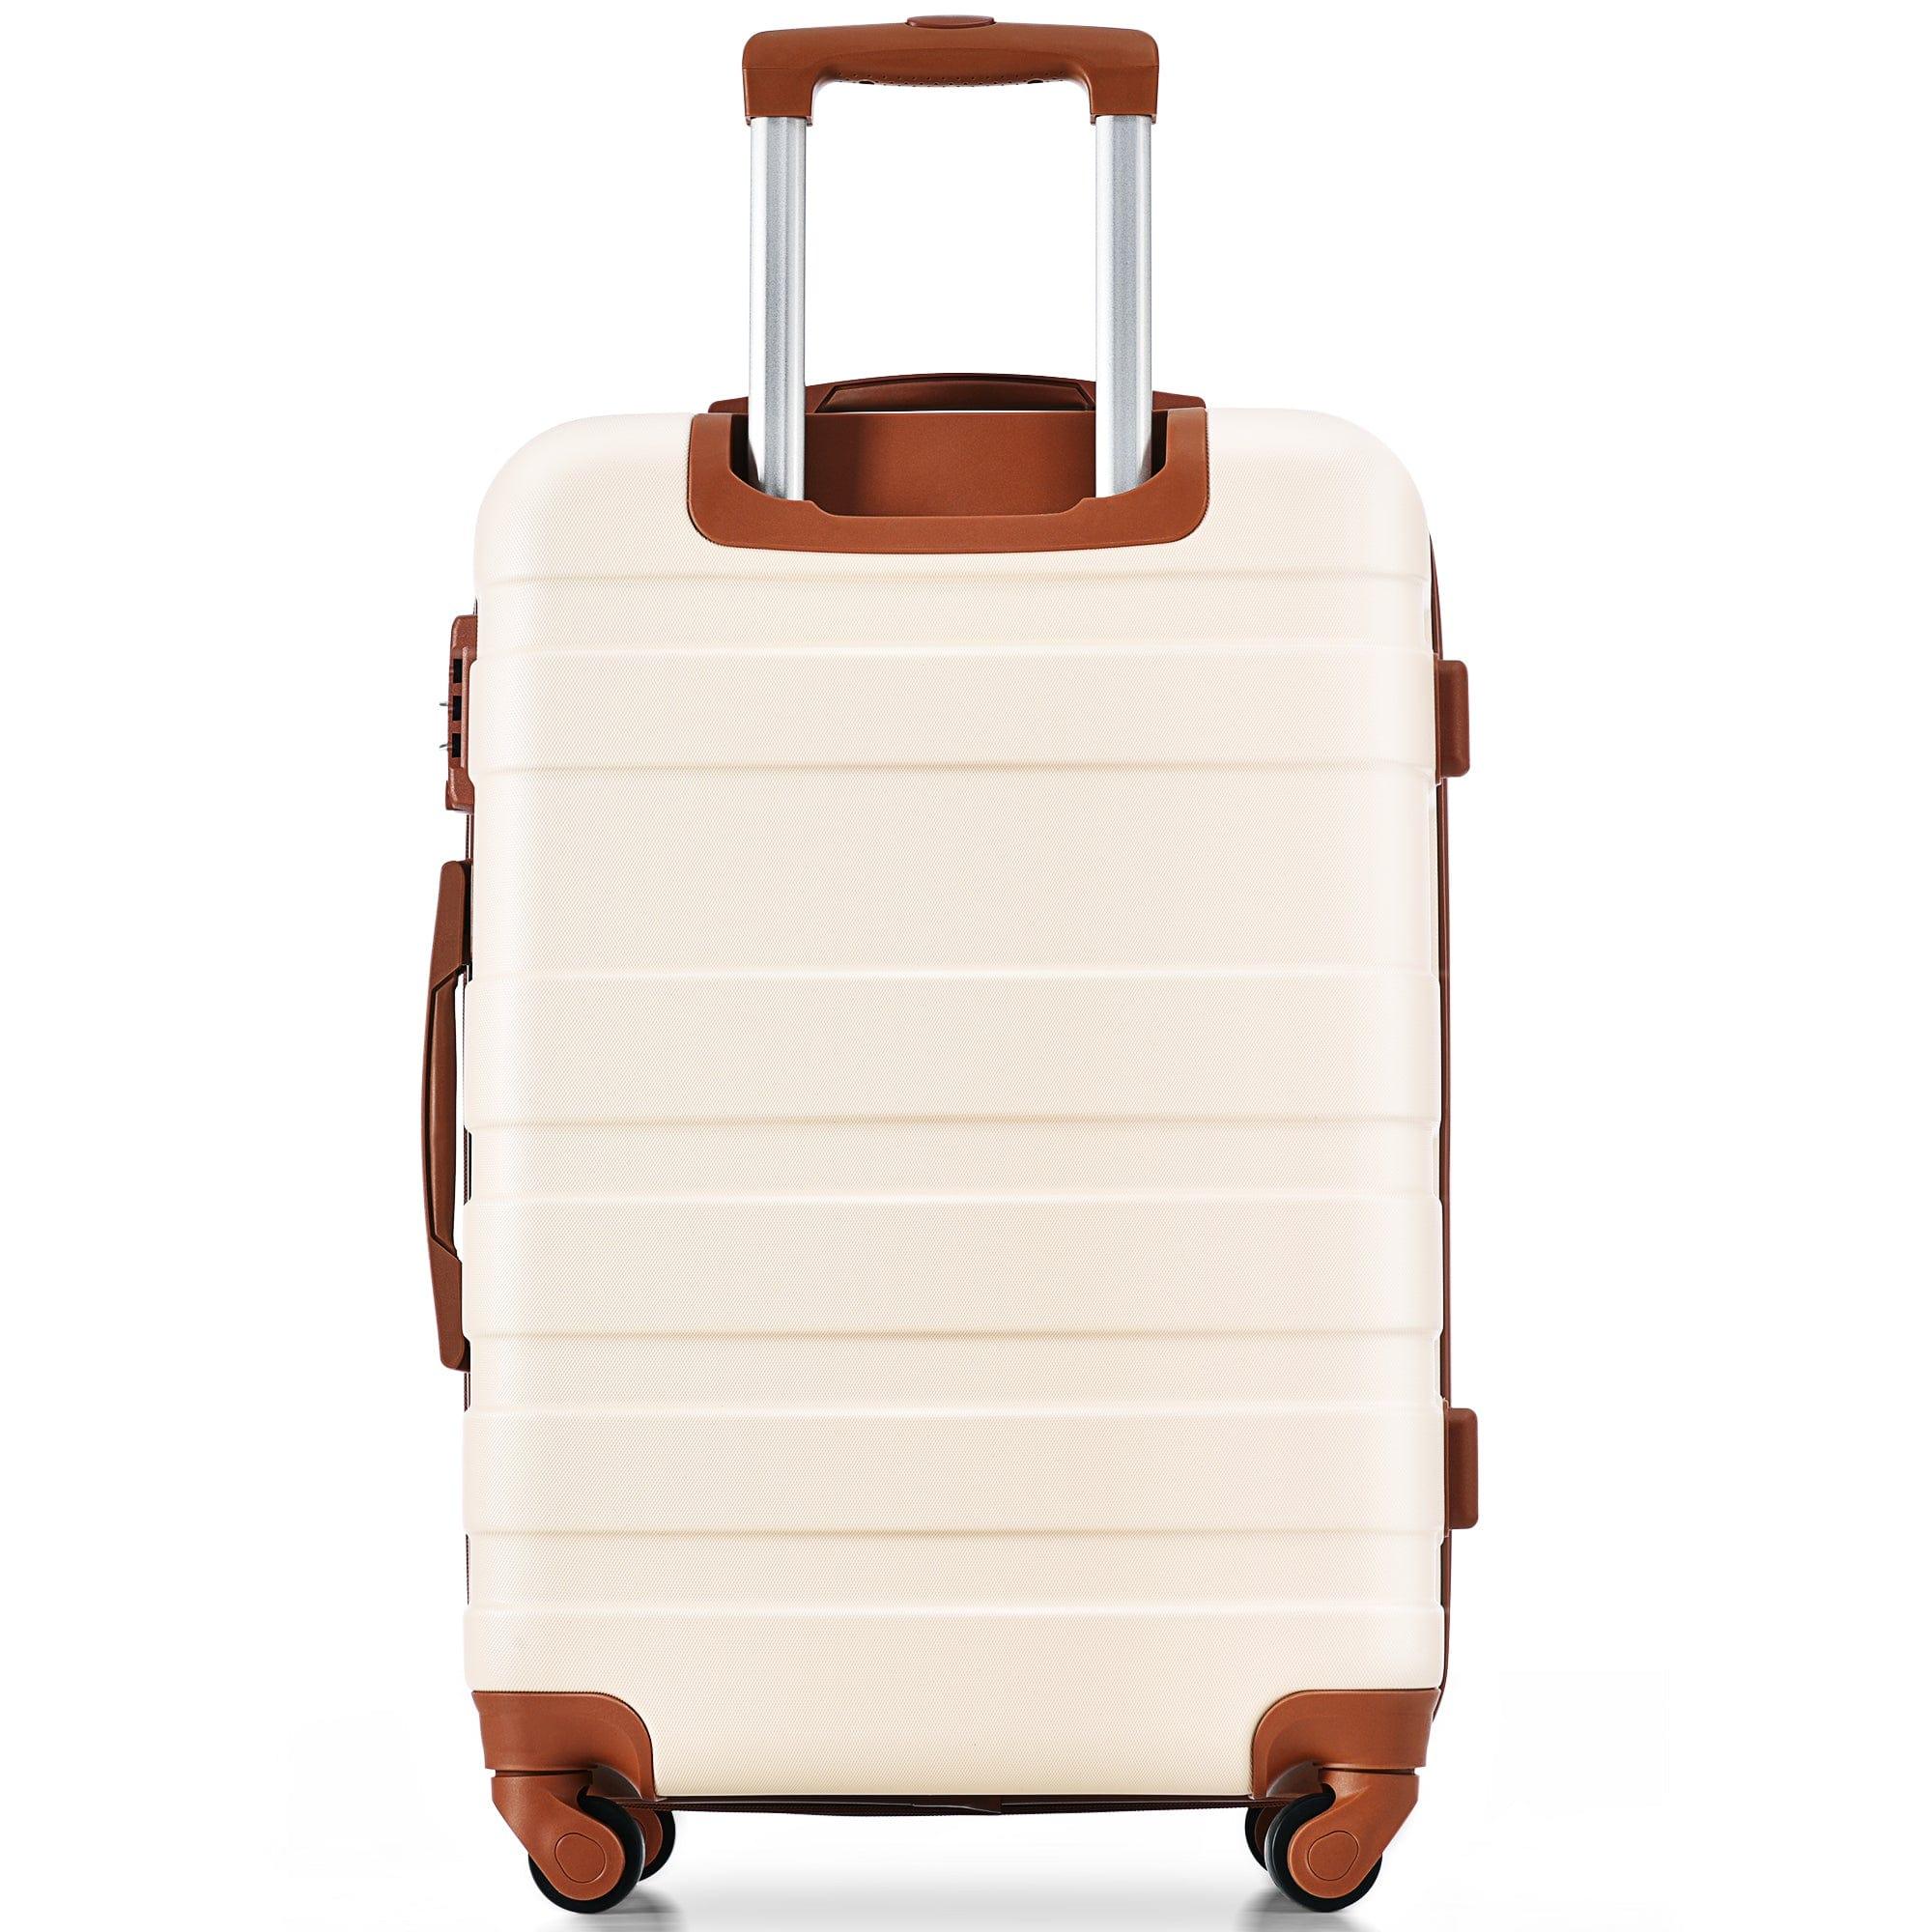 Shop Luggage Sets New Model Expandable ABS Hardshell 3pcs Clearance Luggage Hardside Lightweight Durable Suitcase sets Spinner Wheels Suitcase with TSA Lock 20''24''28''(ivory and brown) Mademoiselle Home Decor